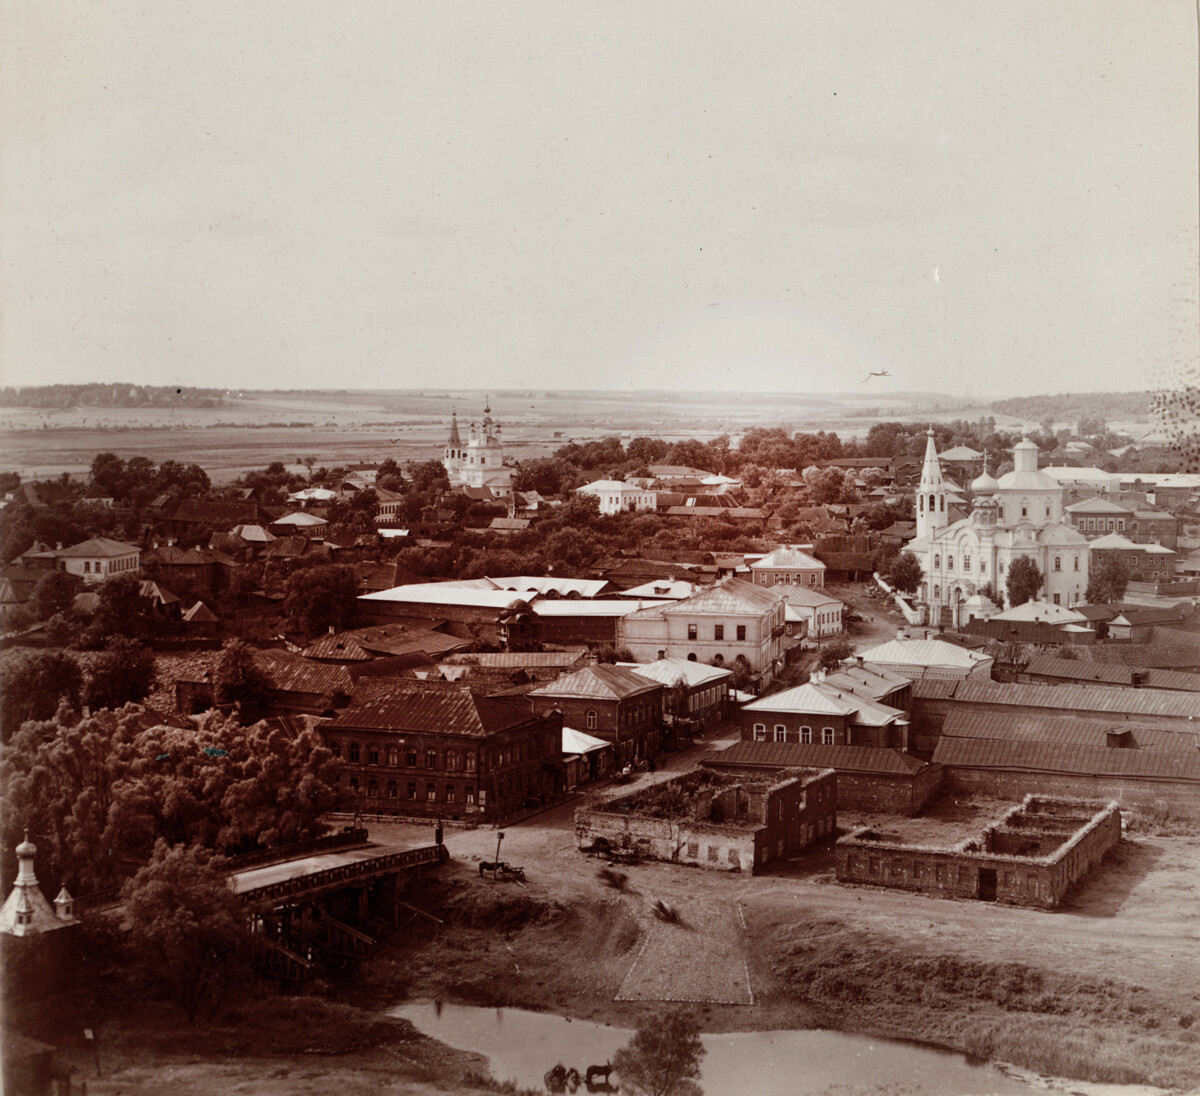  Vyazma from Trinity Cathedral bell tower. View northwest toward fields in the direction of the Khmelita estate. Church of the Annuciation (left) & Church of Entry into Jerusalem, both destroyed during the Soviet period. Summer 1912